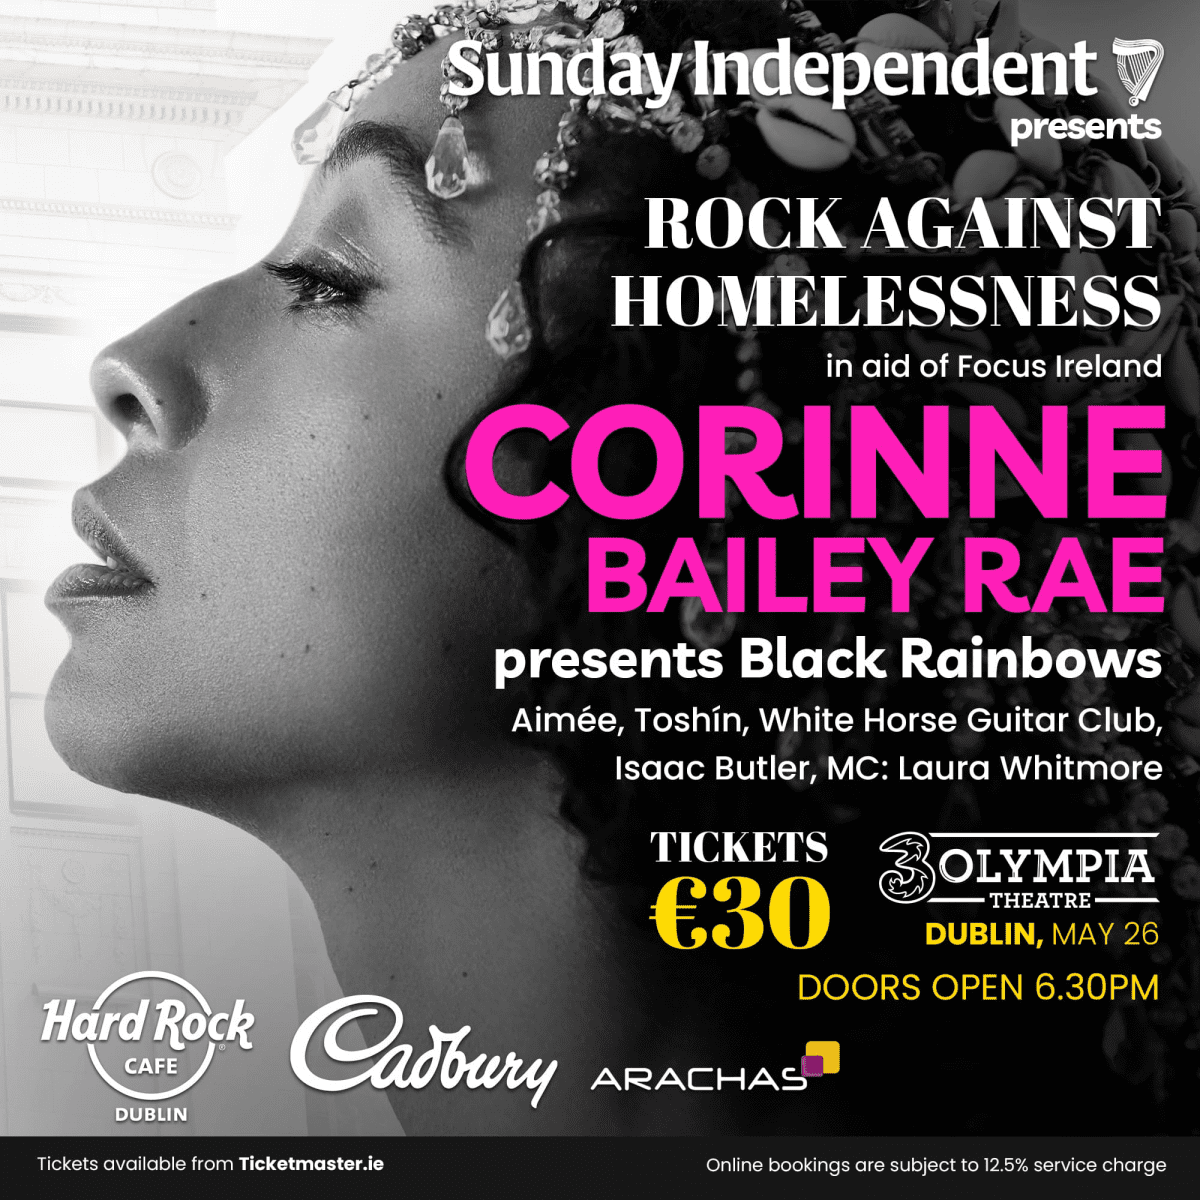 Poster for Rock Against Homelessness, featuring Corinne Bailey Rae.